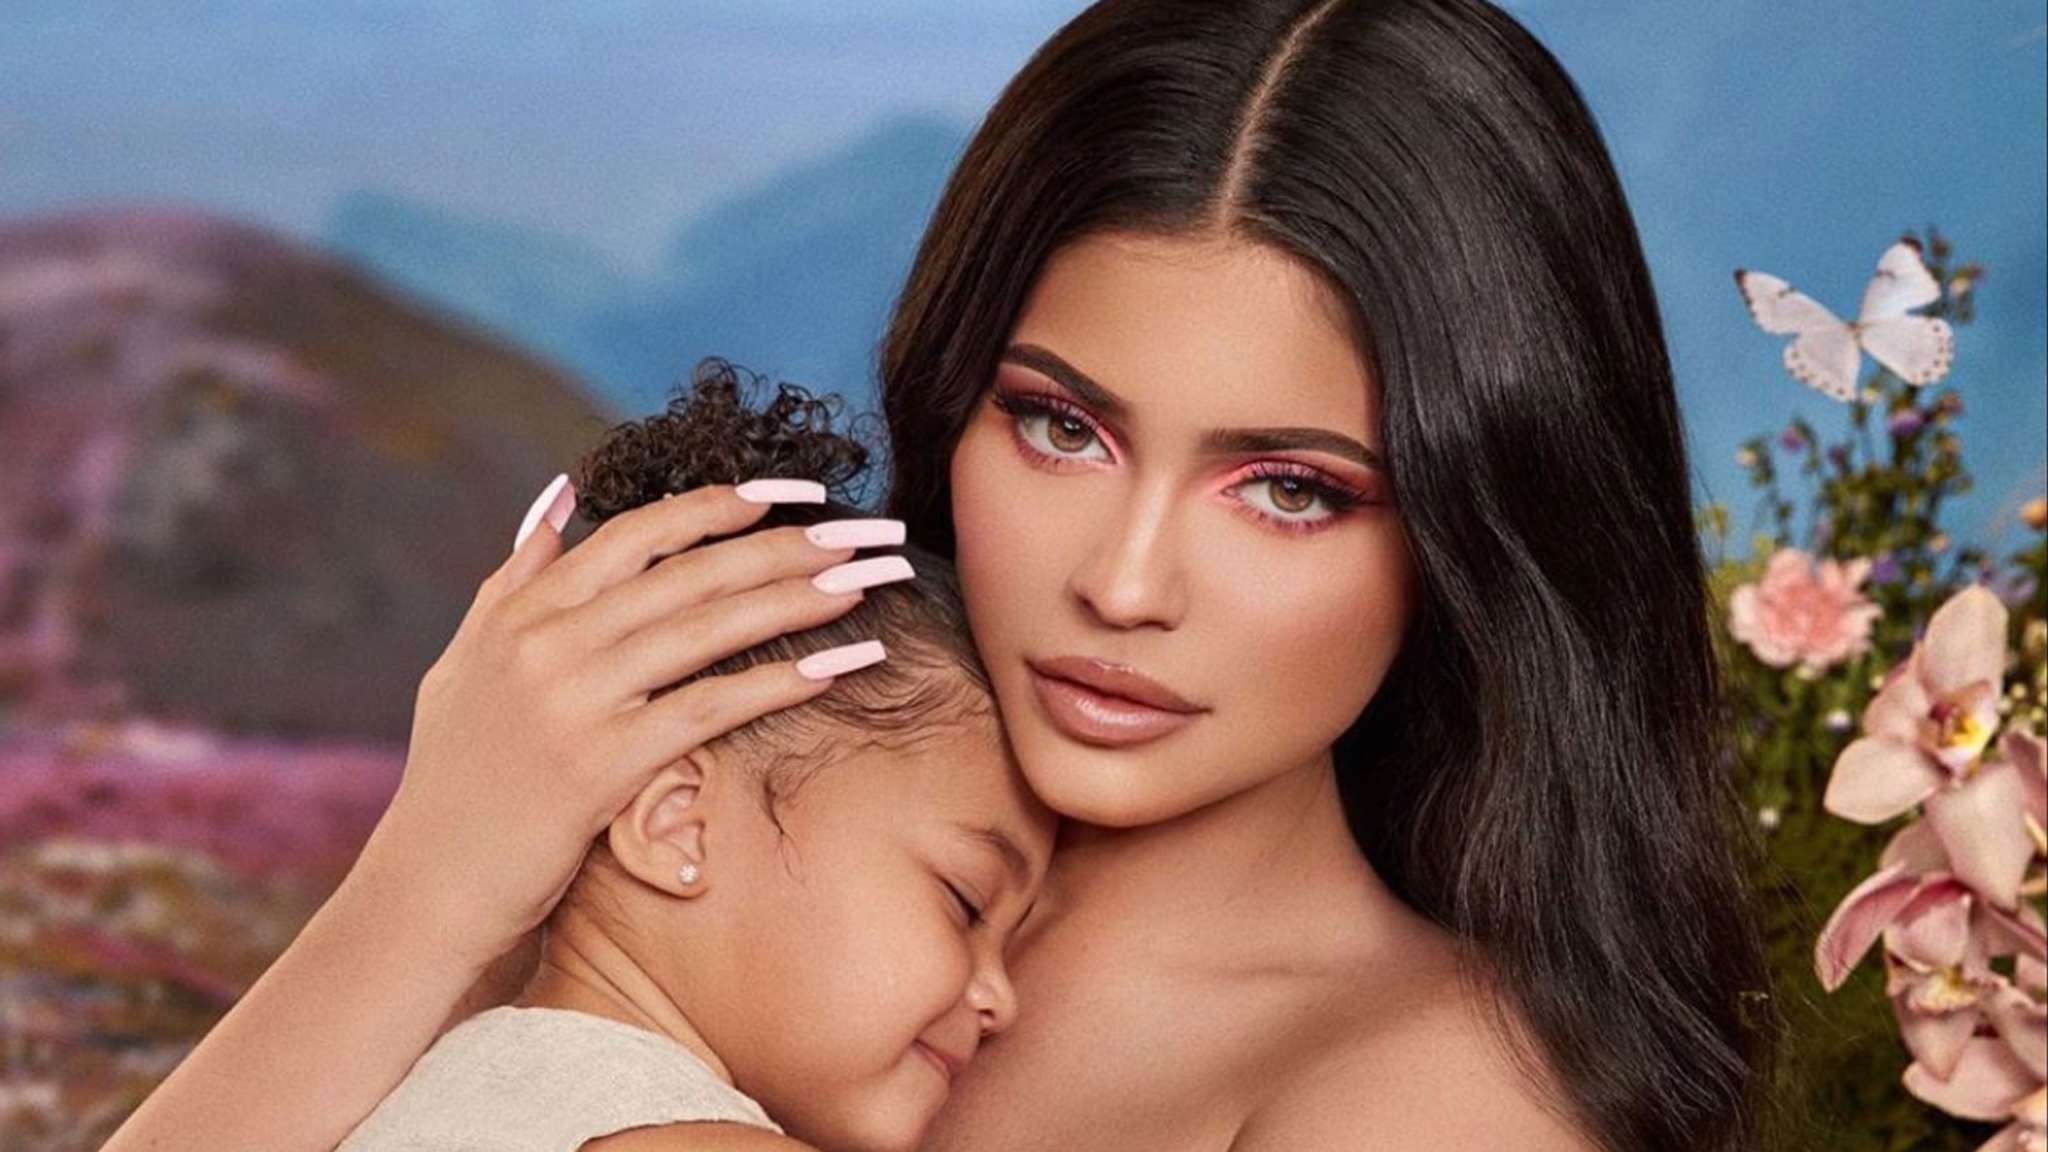 Kylie Jenner Posts Emotional Message And Gorgeous Photos For Her Daughter, Stormi Webster's Birthday